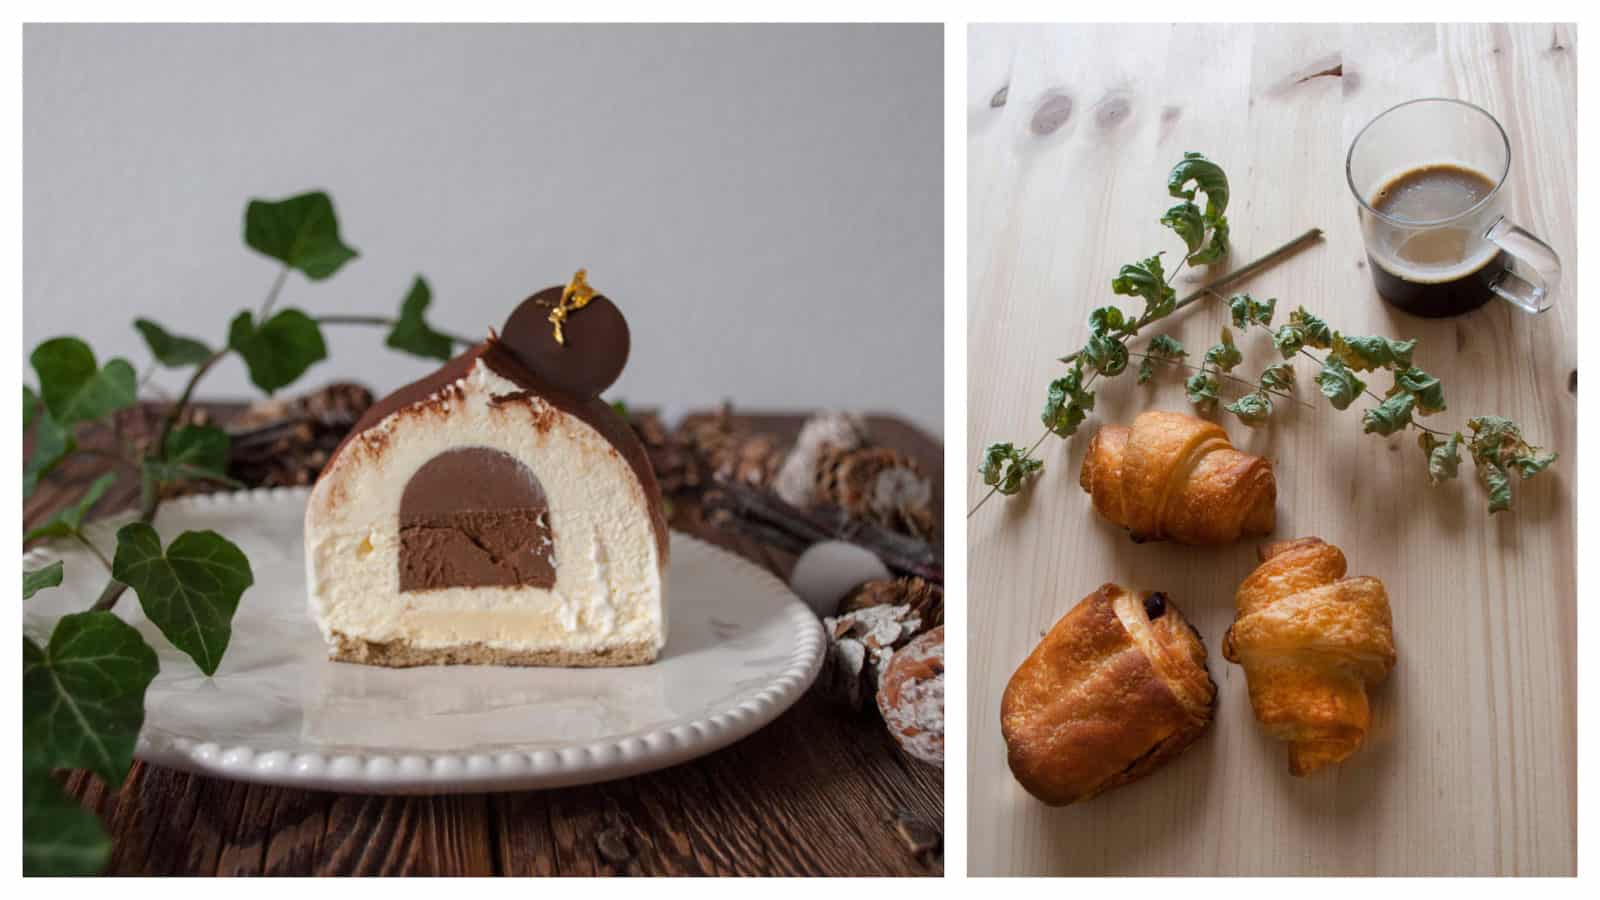 Vanilla and chocolate ice cream cake (left) and gluten-free croissants and pains au chocolat (right) from from Paris bakery Helmut Newcake.